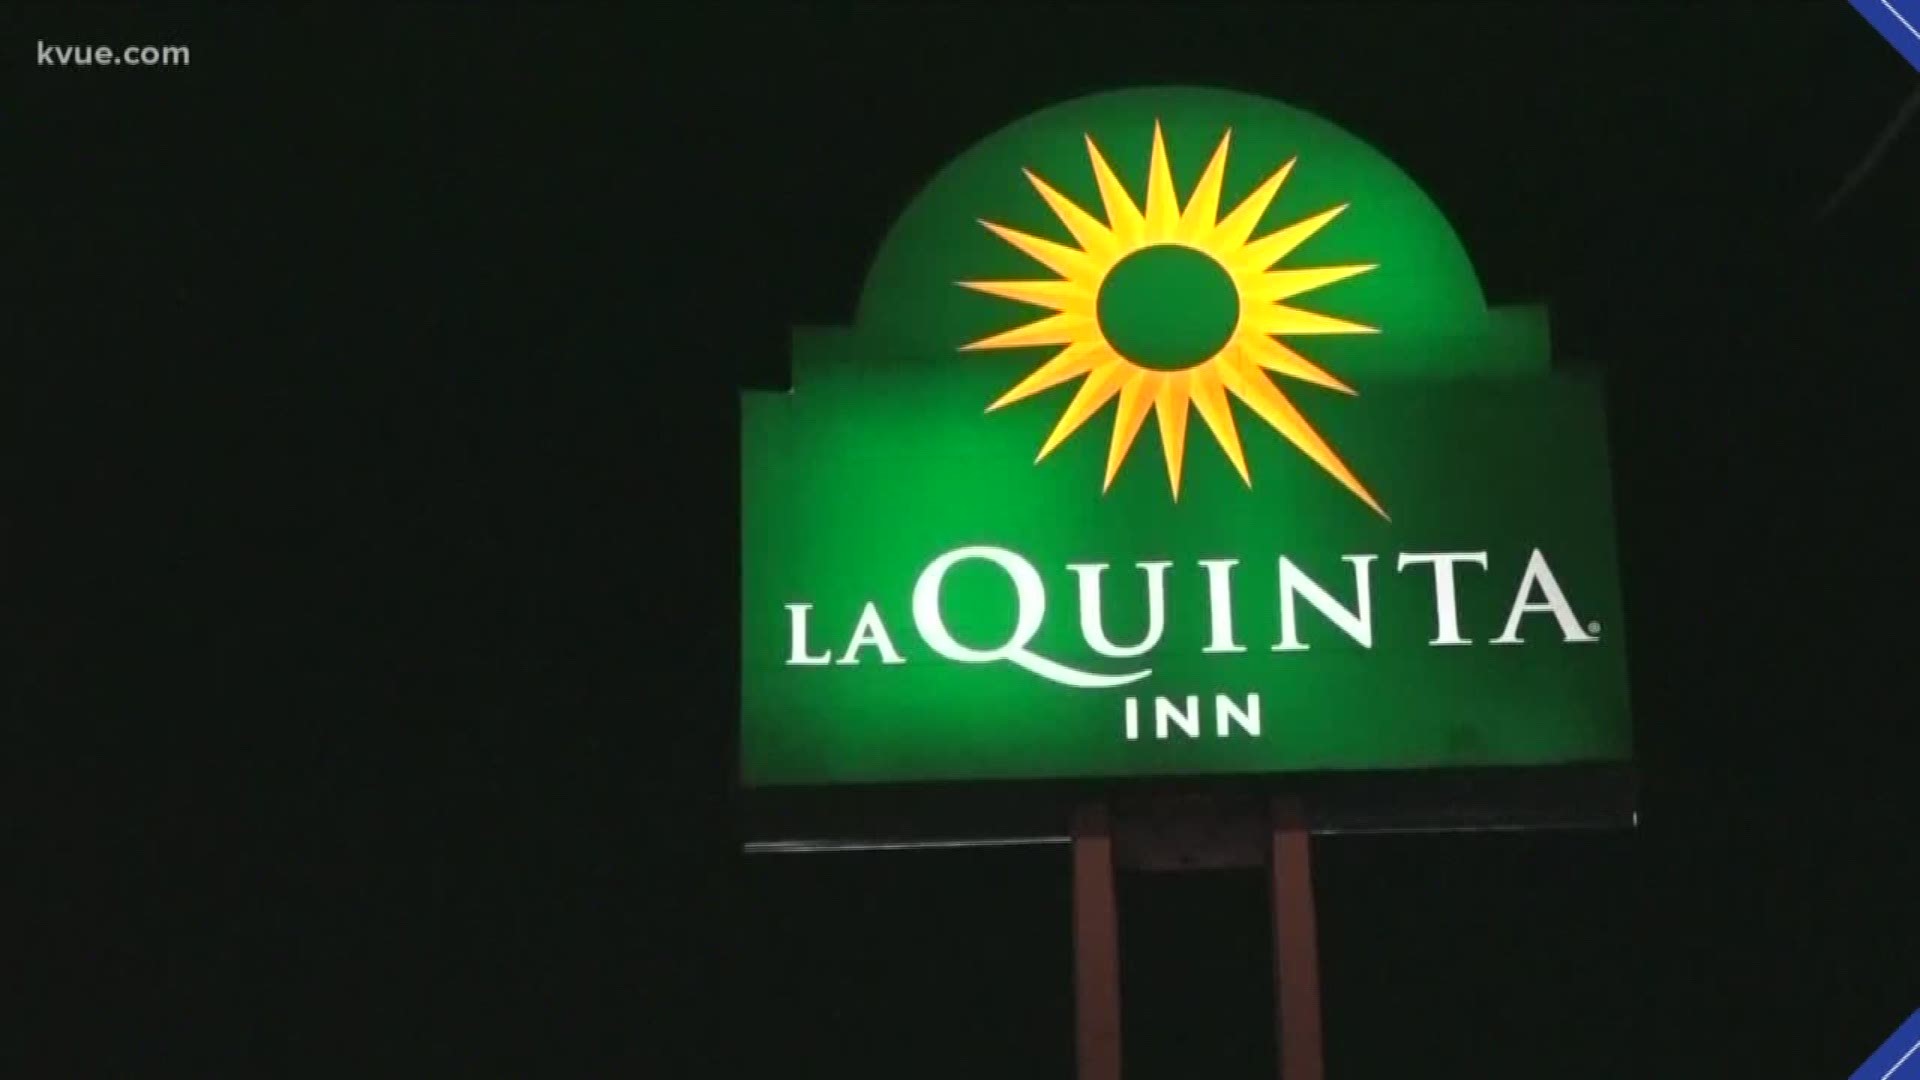 Police have released the name of the man killed at the La Quinta Inn off I-35 early Wednesday morning.